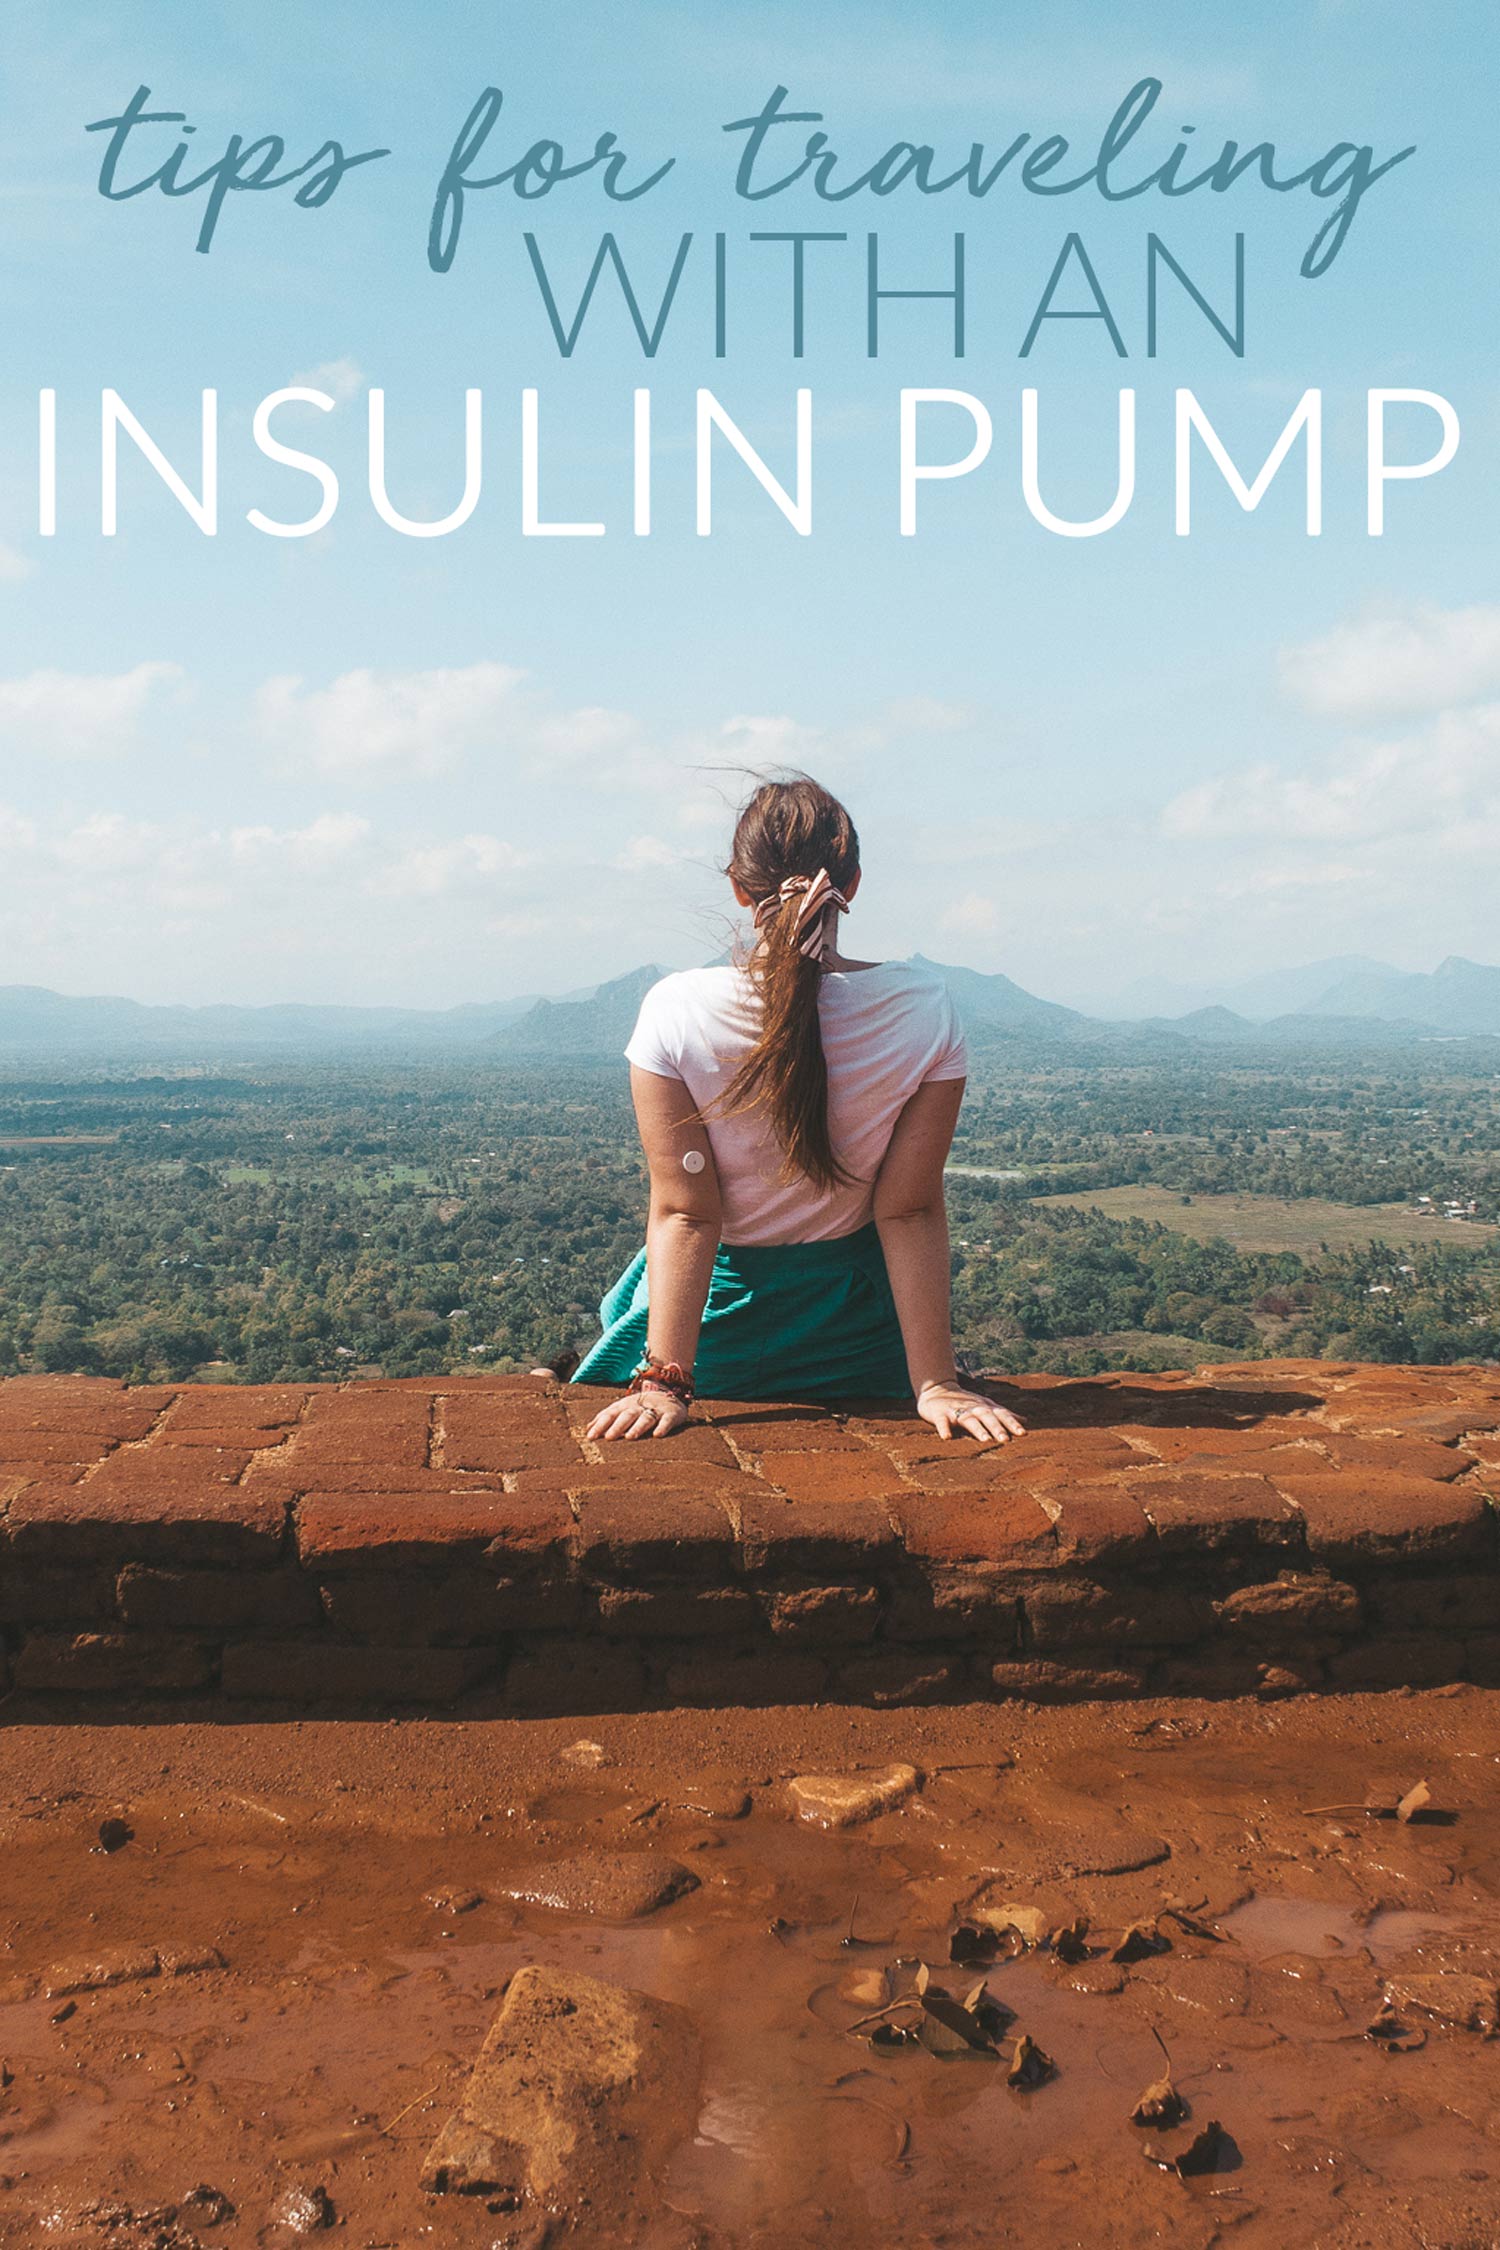 Tips for Traveling with an Insulin Pump